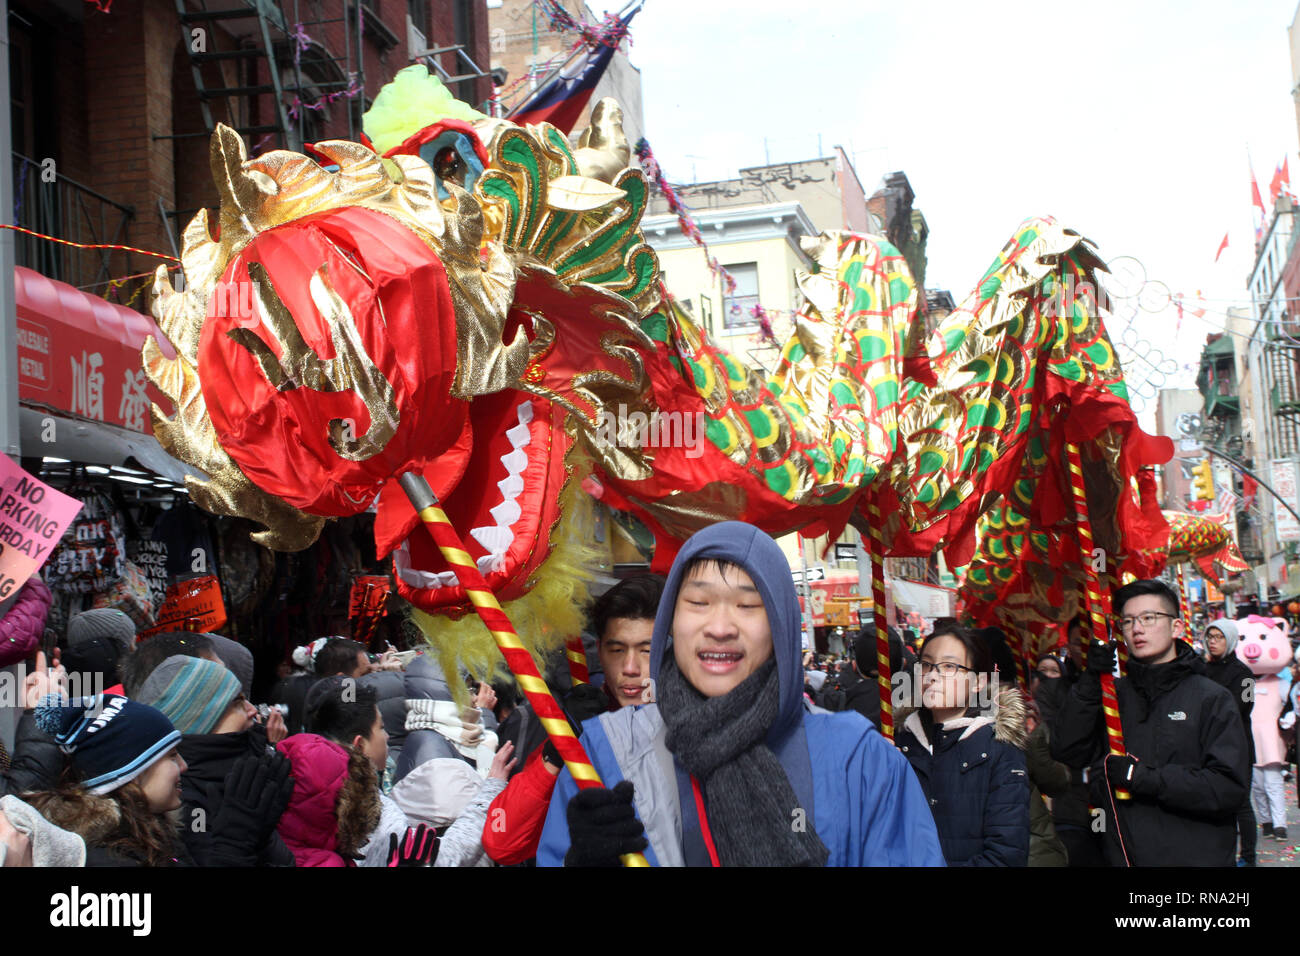 New York, New York, USA. 17th Feb, 2019. A Dragon dances for thousands that packed the streets of Chinatown on Sunday to celebrate the Lunar New Year during the Chinatown Lunar New Year Parade and Festival in New York City. Colorful lions and dragons dance bringing prosperity and good luck as the year of the pig begins. They are also meant to scare away the old spirit. Credit: Bruce Cotler/Globe Photos/ZUMA Wire/Alamy Live News Stock Photo